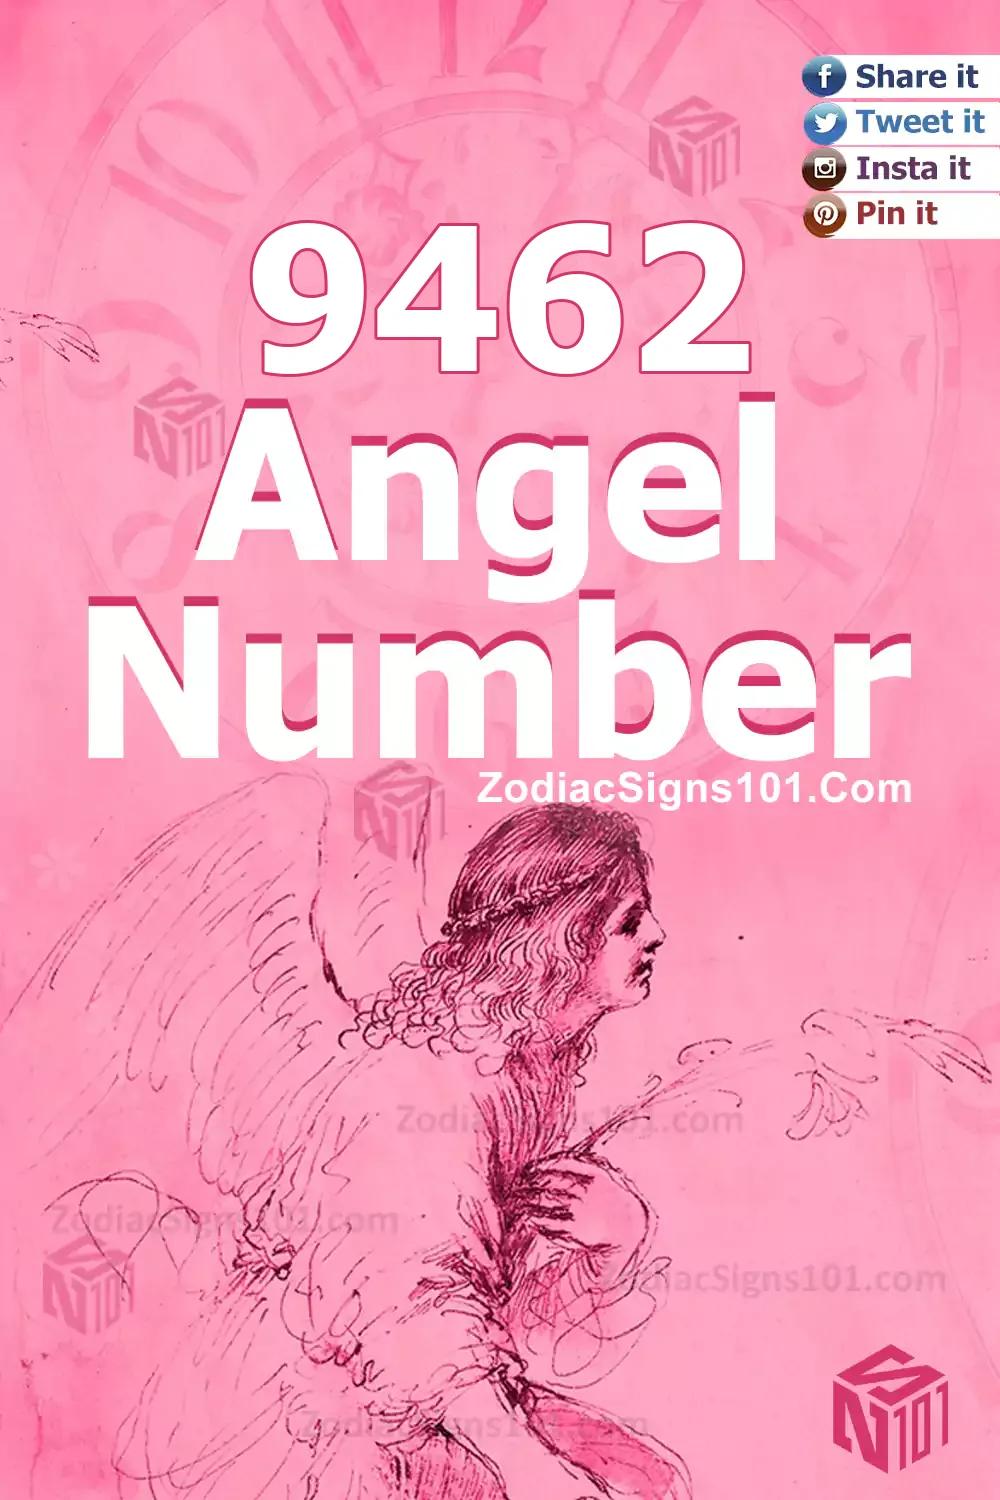 9462 Angel Number Meaning